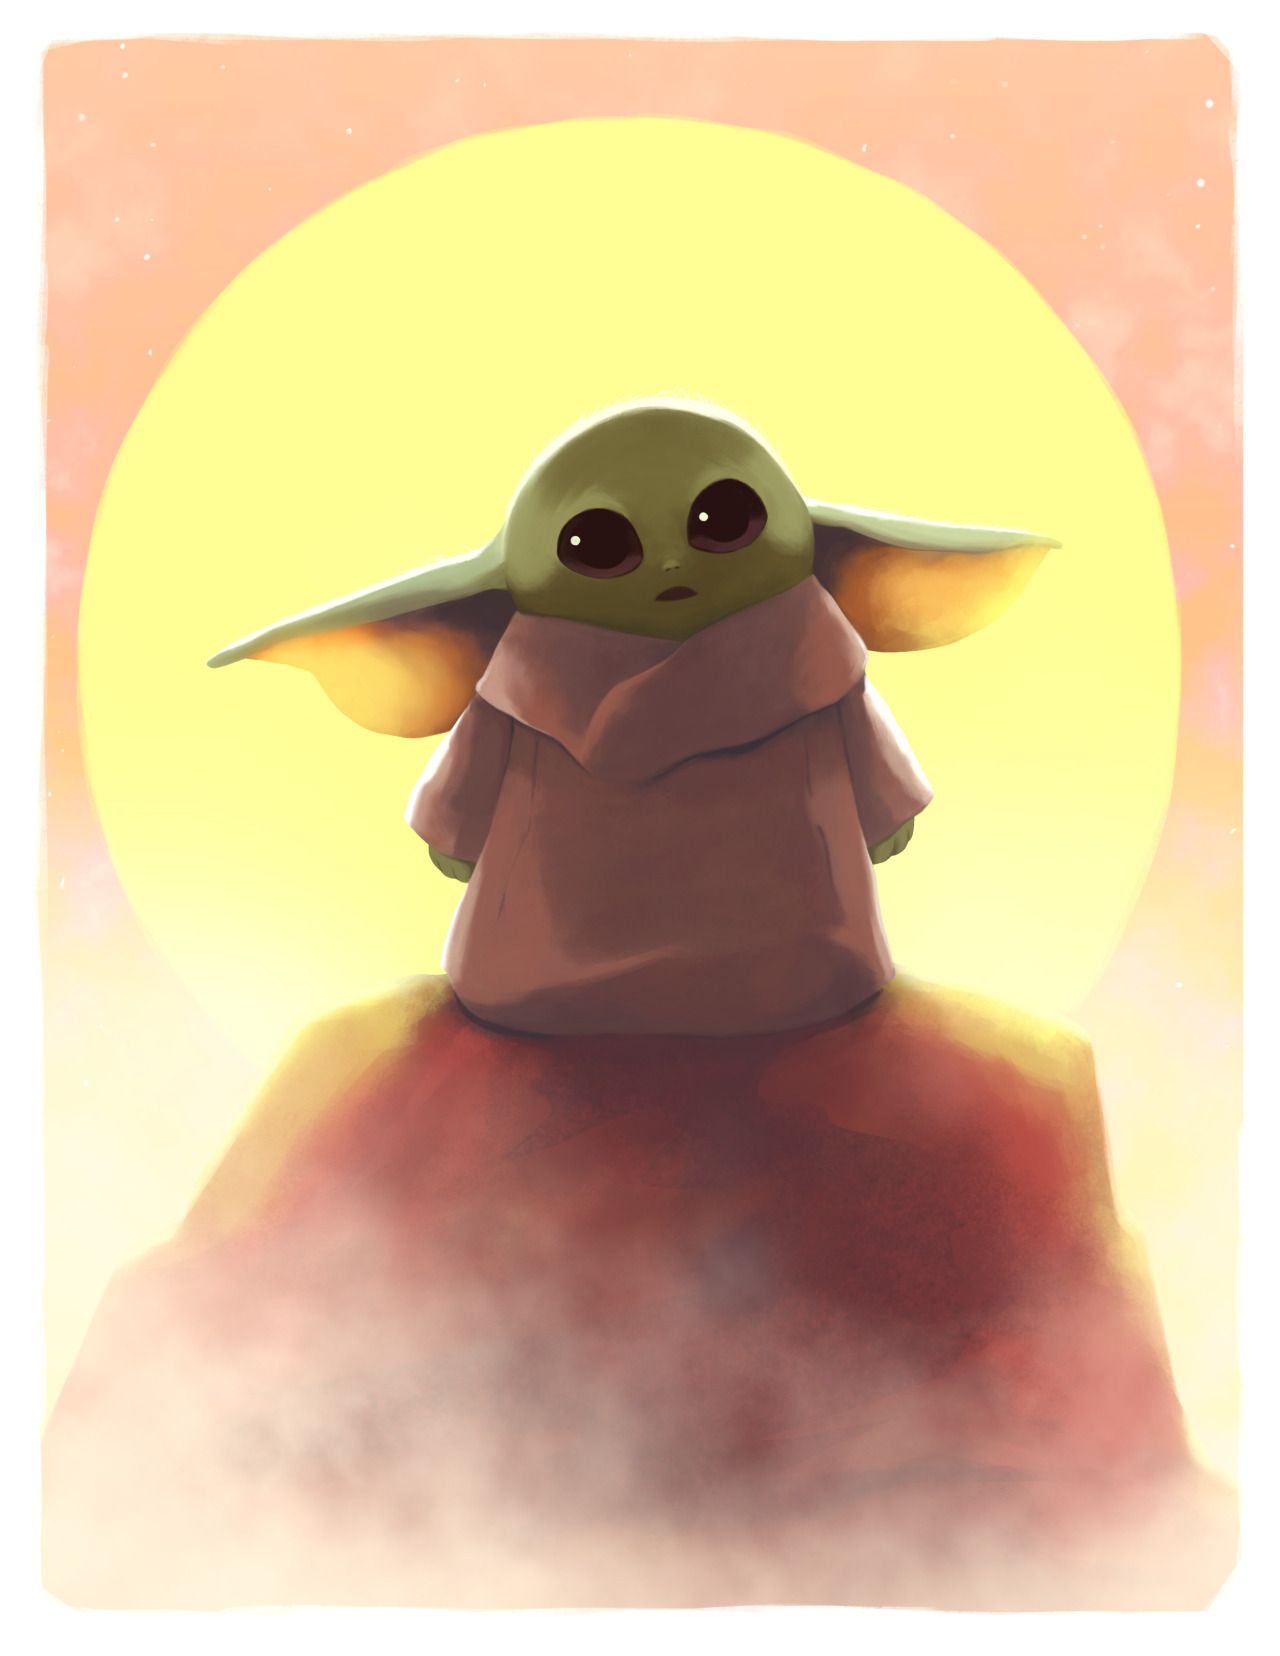 Leann Hill Art Wars The Child / Baby Yoda From The Mandalorian (Large)